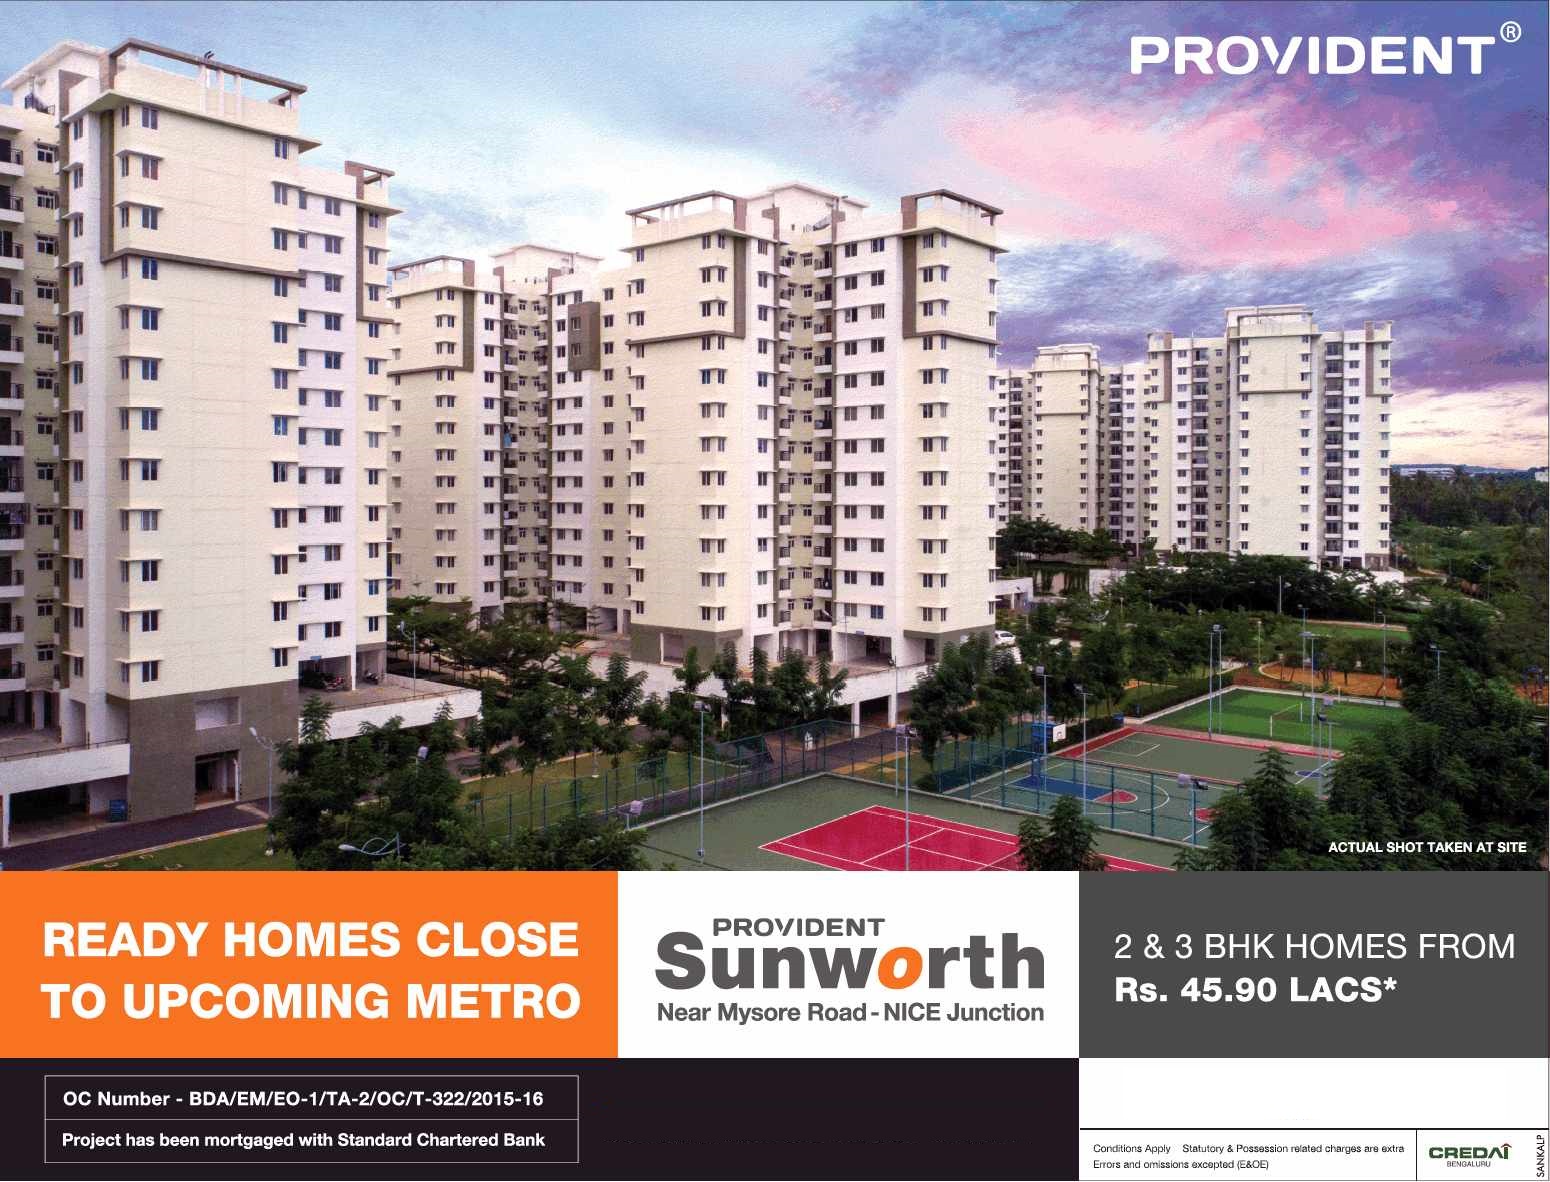 Book 2 & 3 BHK homes at Rs.45.90 lakhs at Provident Sunworth in  Bangalore Update